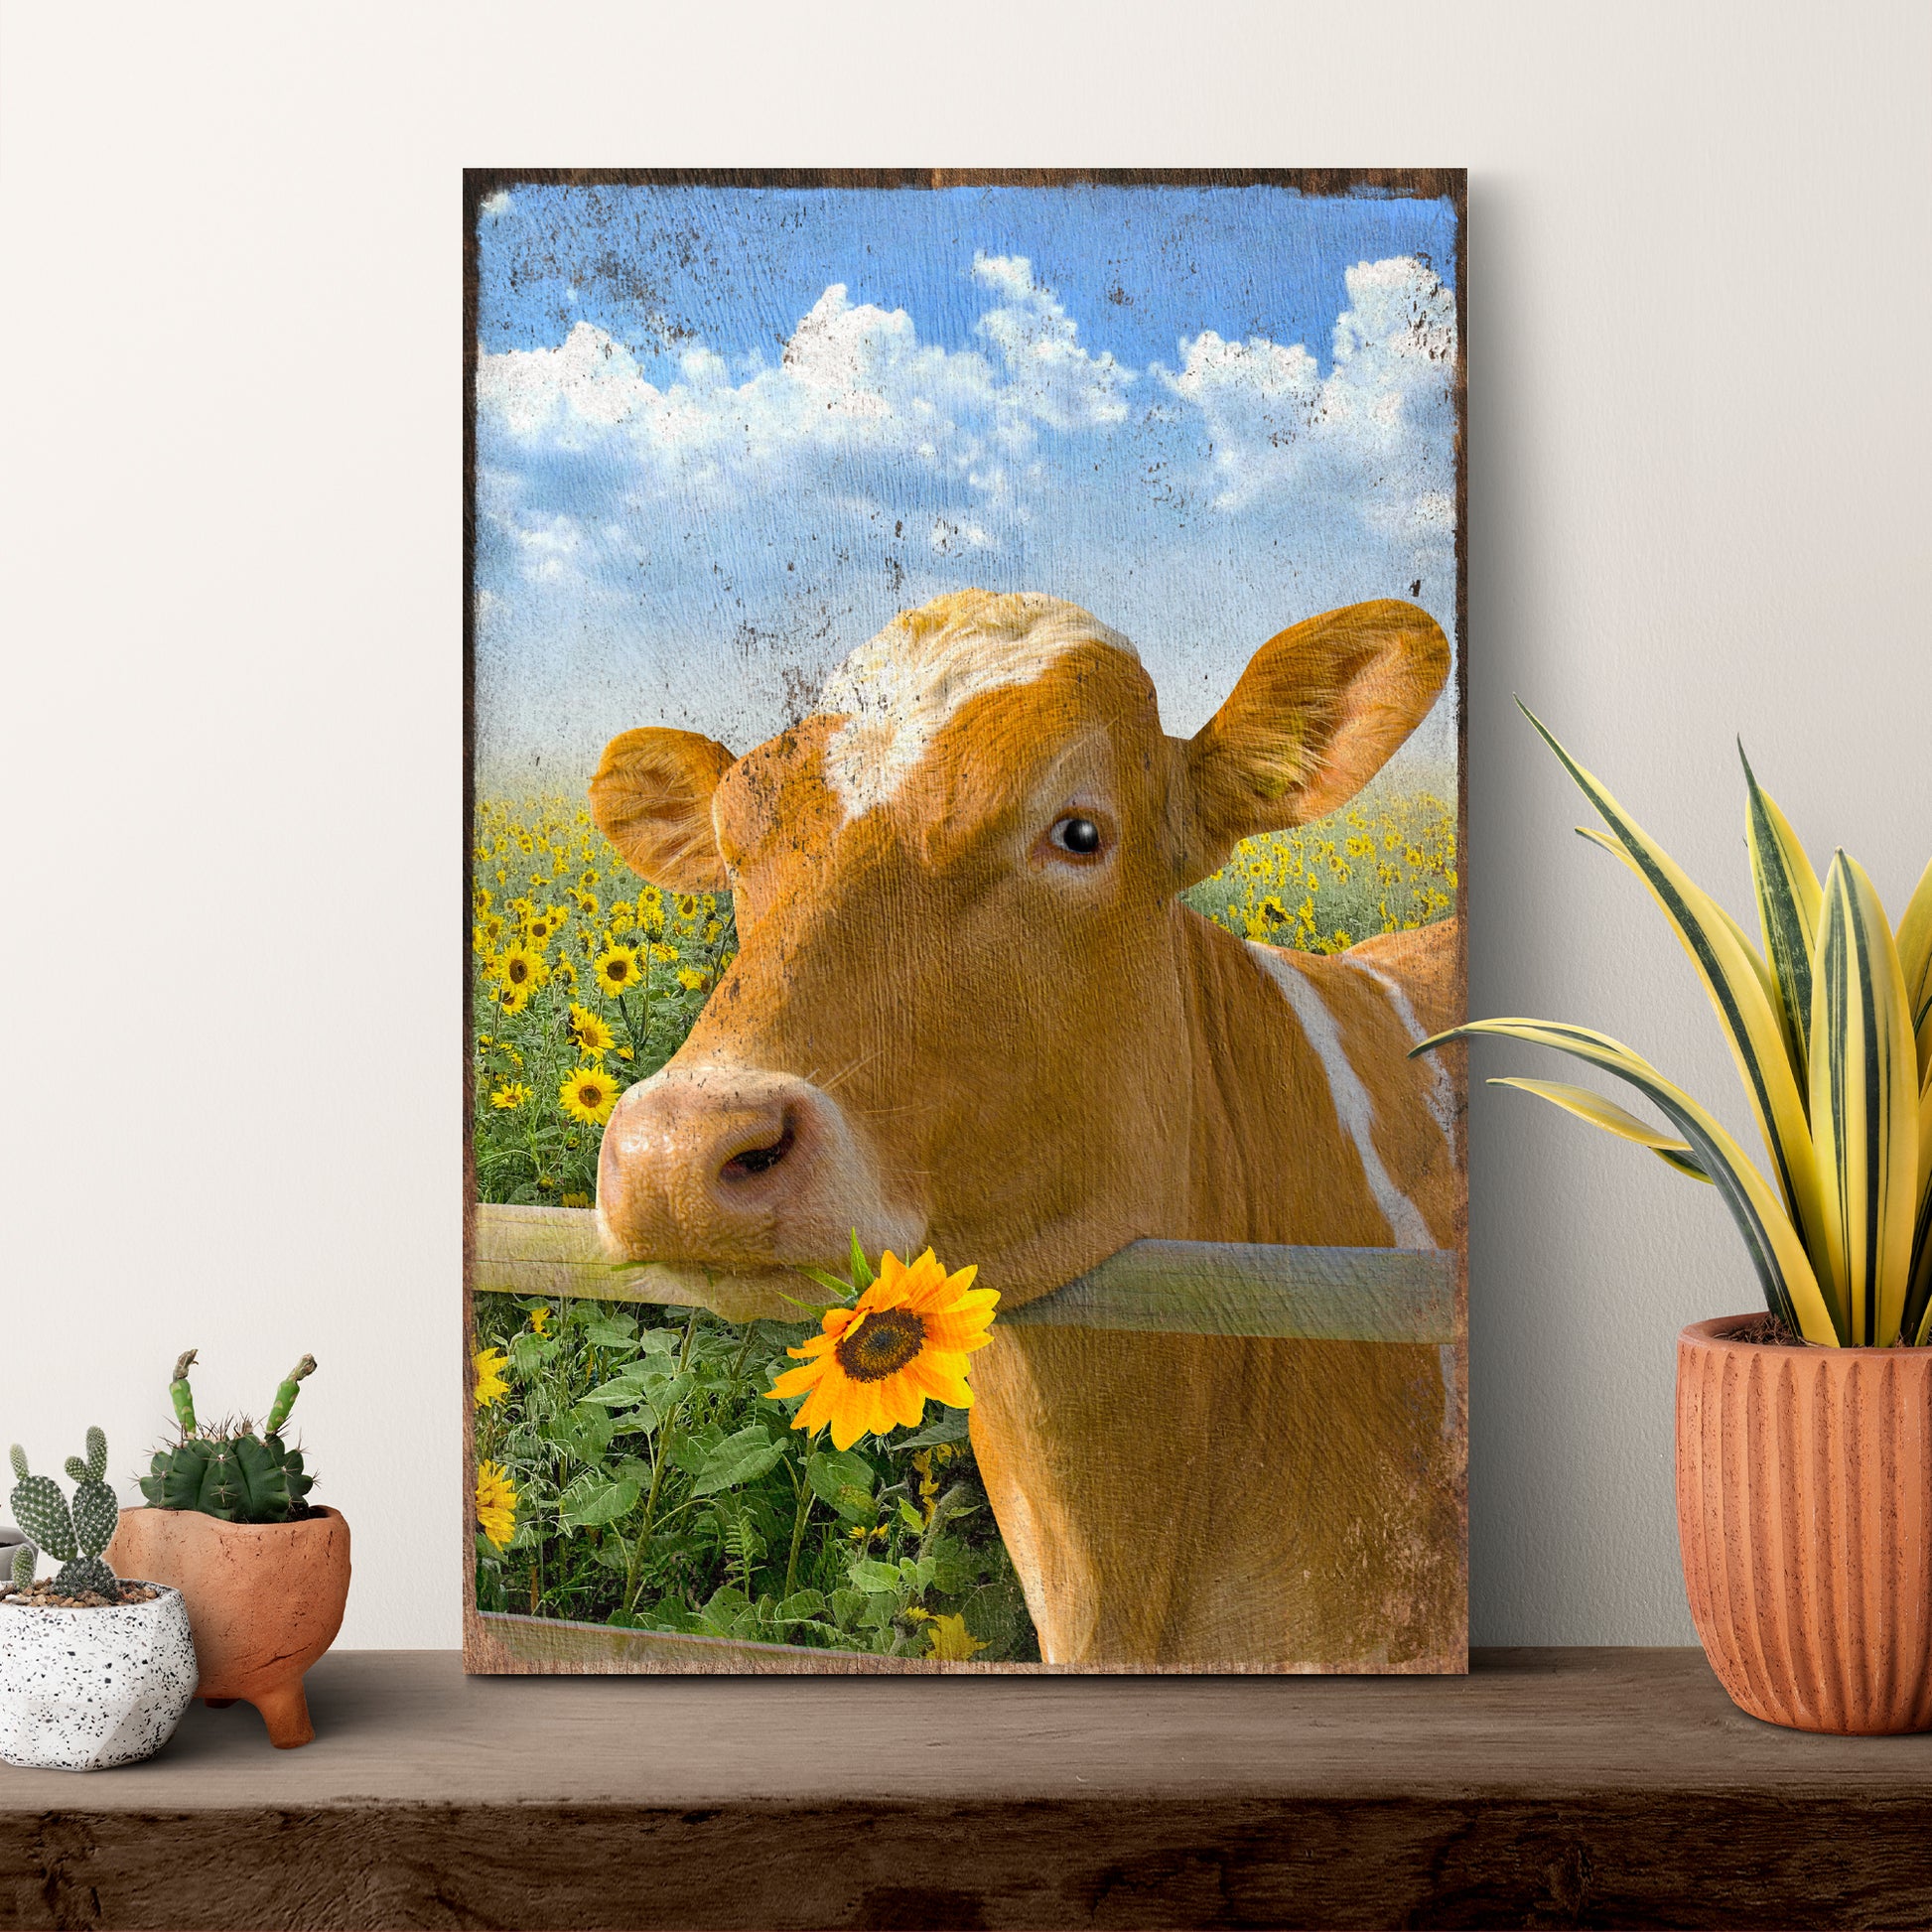 Cattle Cow With Sunflower Canvas Wall Art - Image by Tailored Canvases